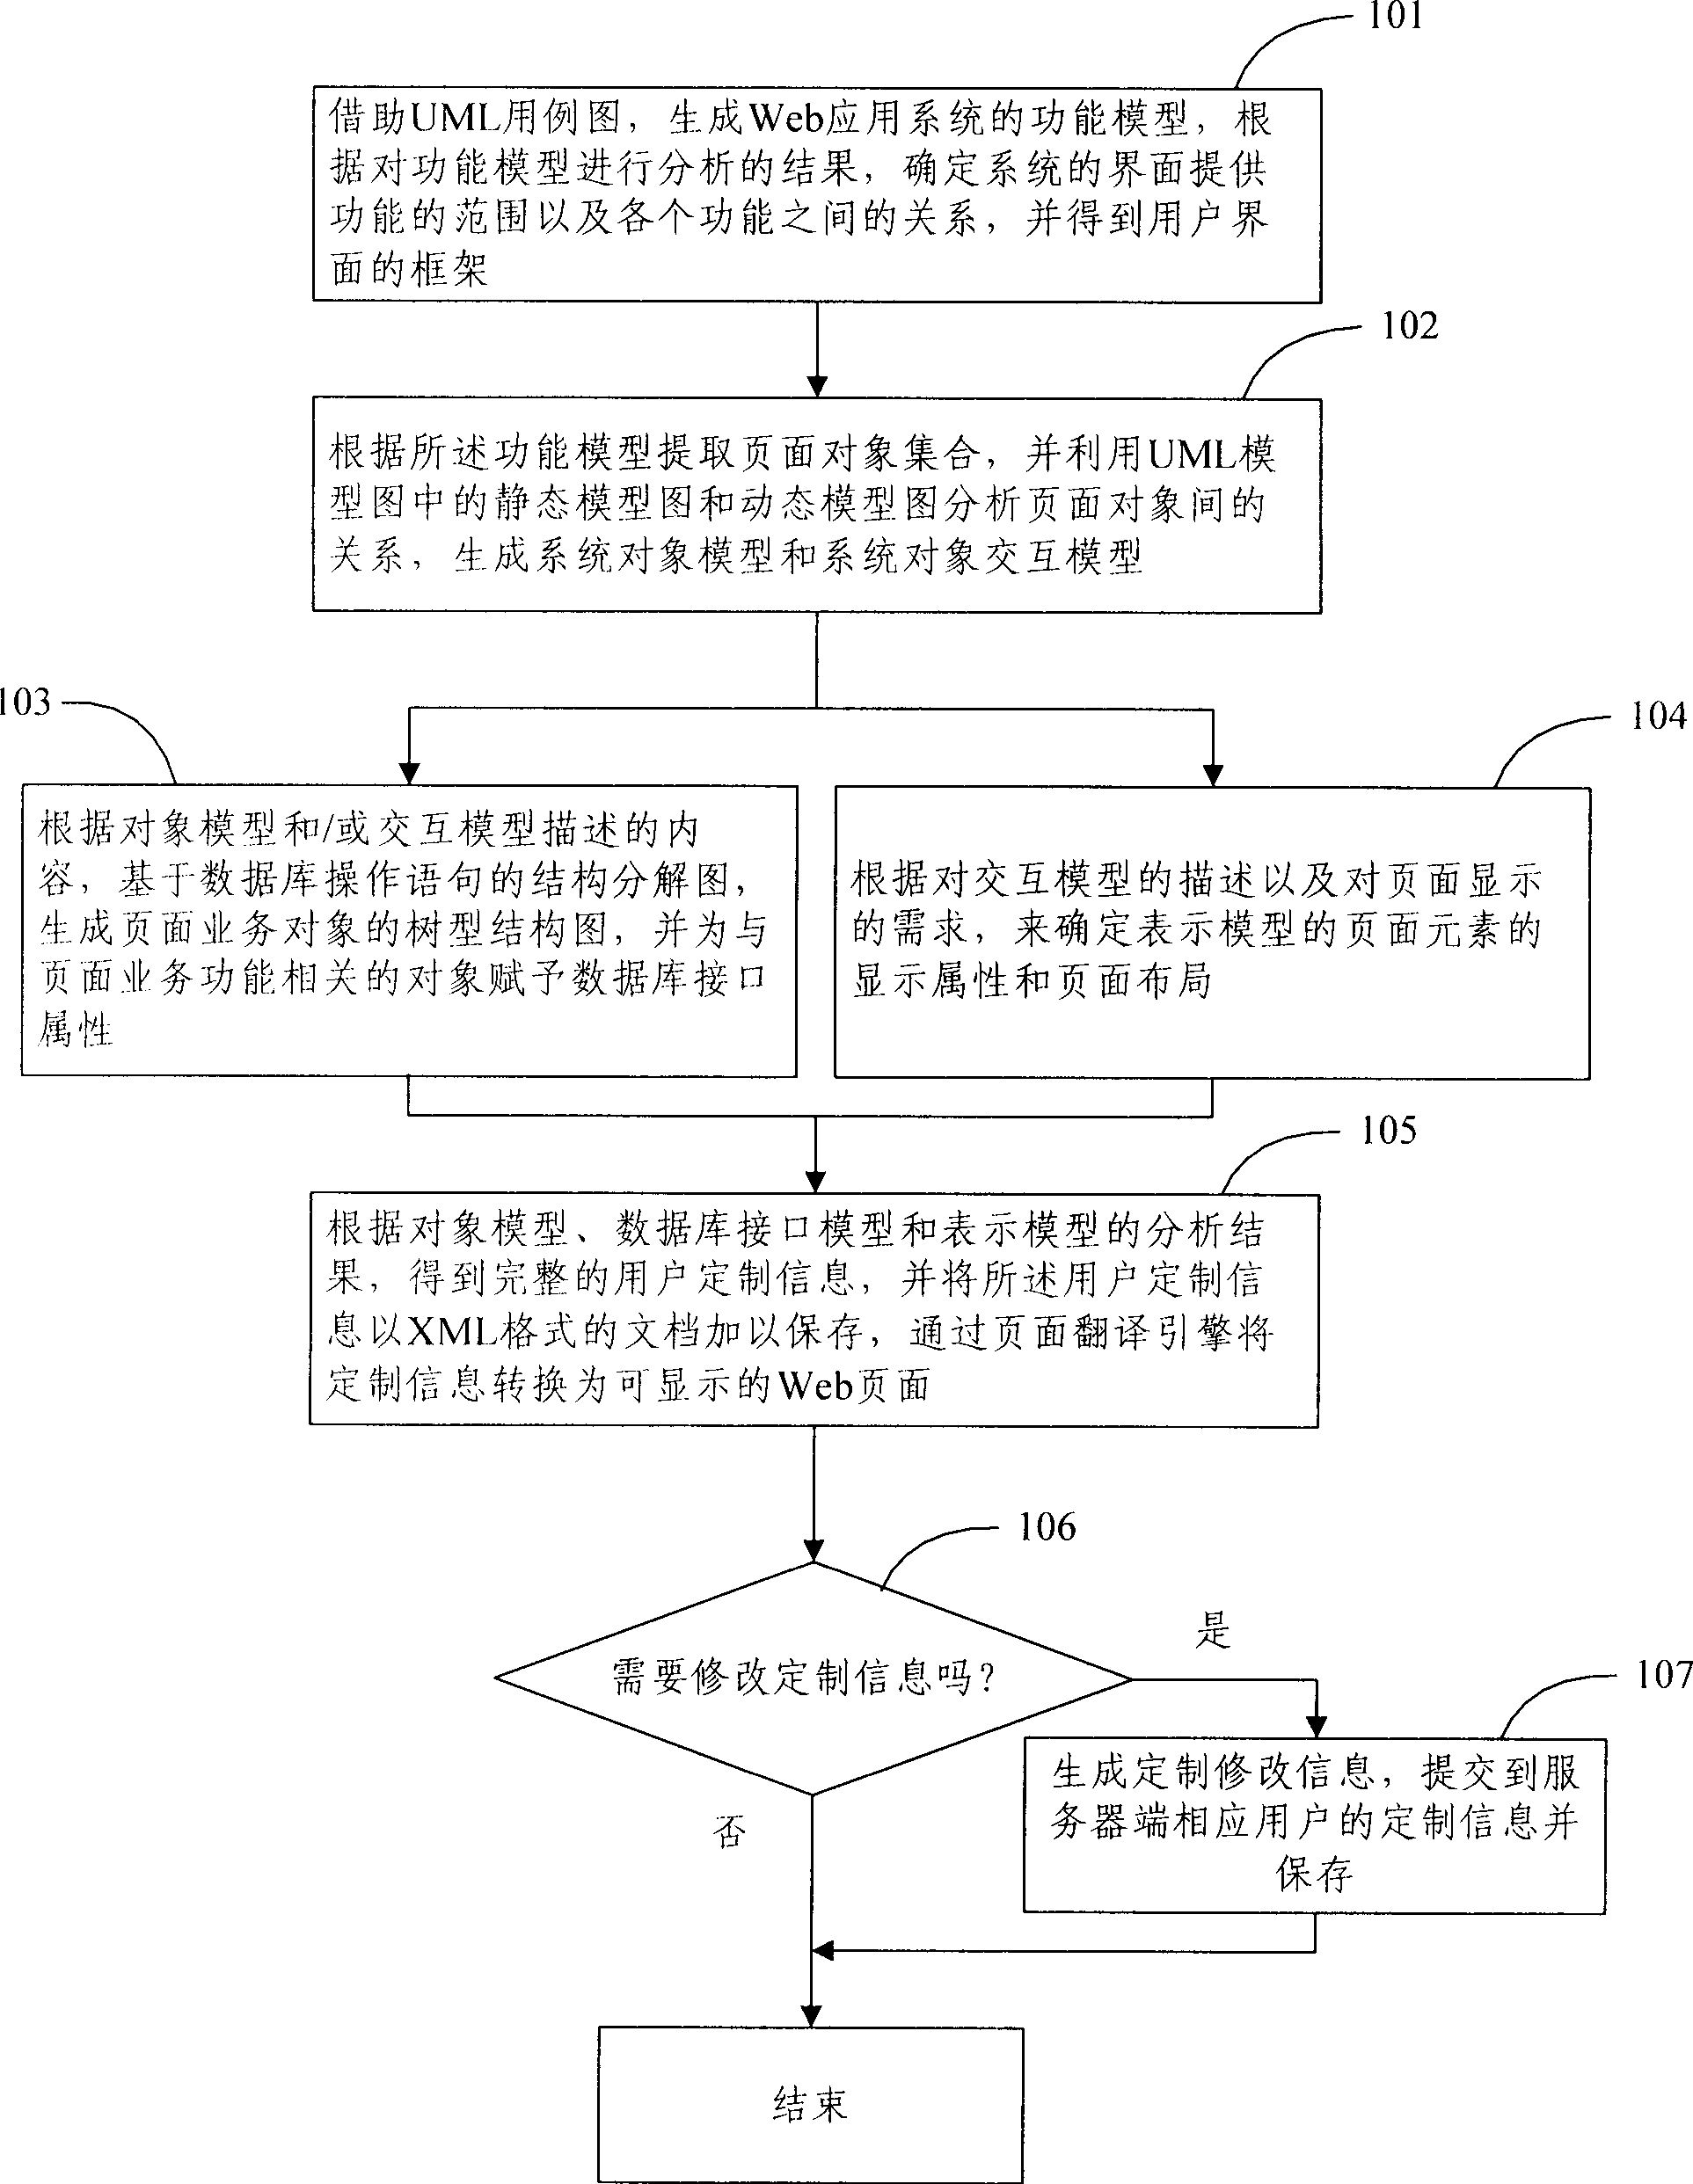 A page generation method facing to Web application system